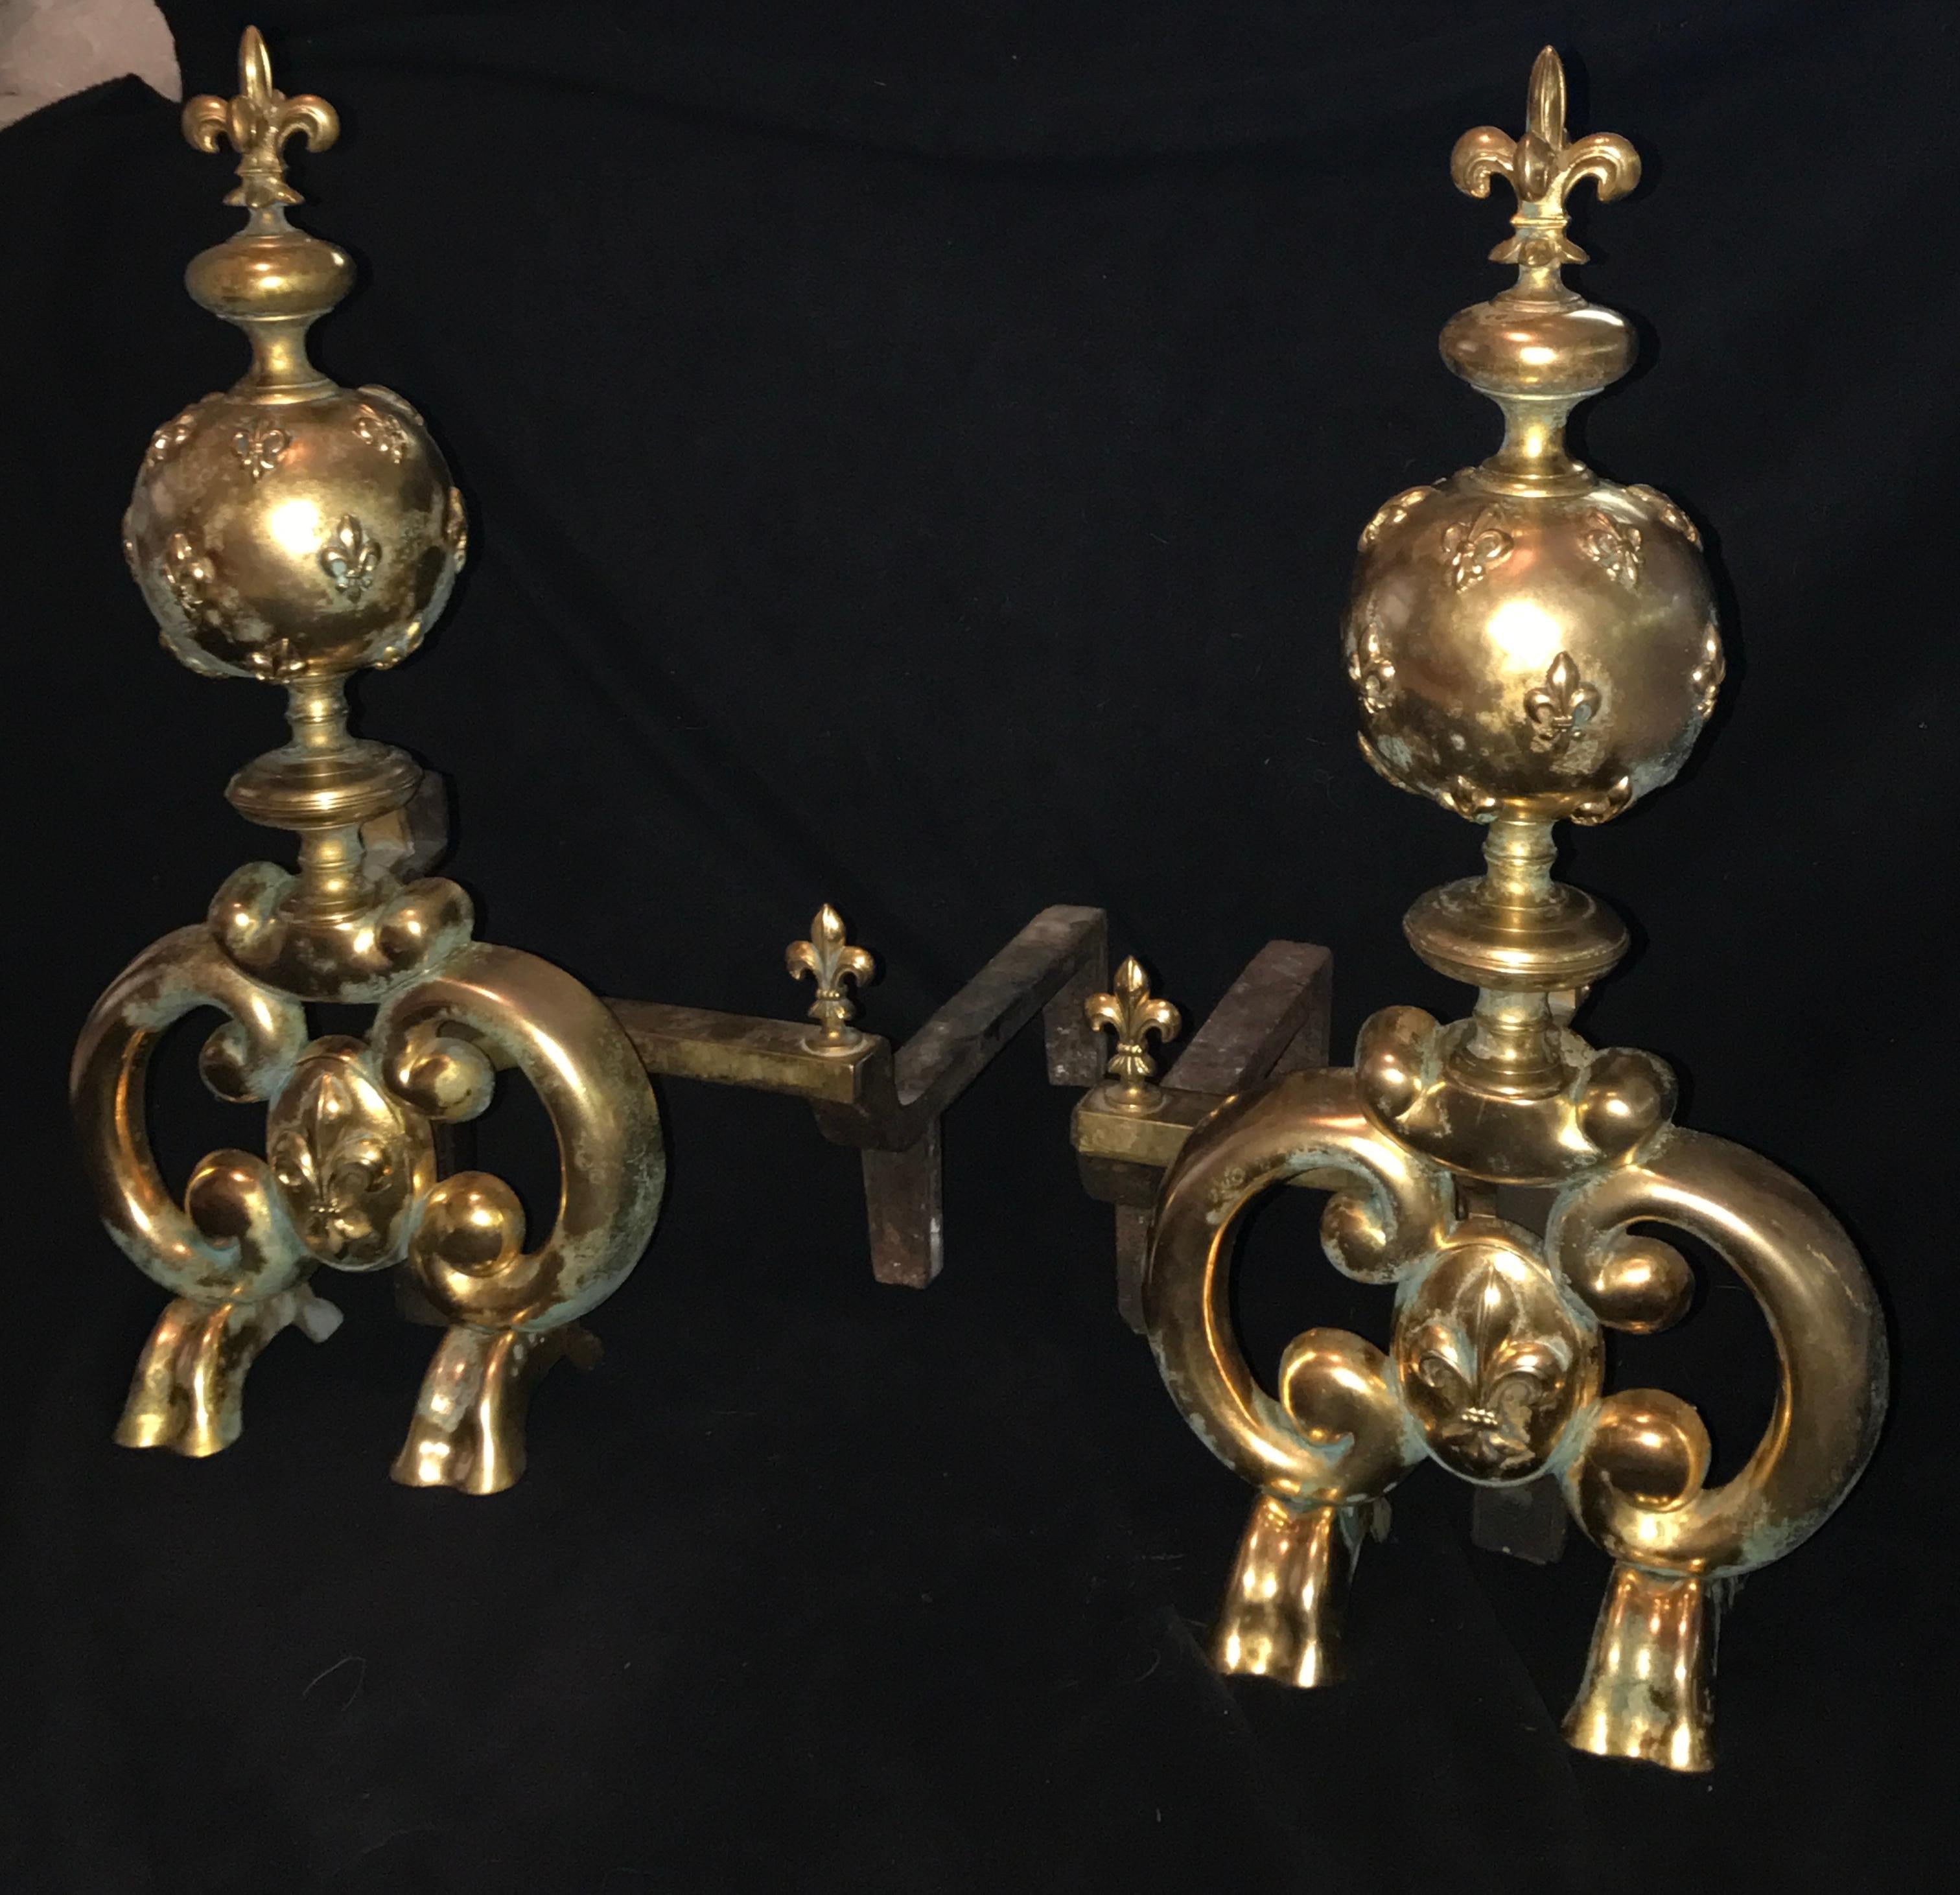 Nice pair of Fleur de Lys decorated, Louis XIV style andirons with extensions. Very functional as well as beautiful, Made in the late 19th century. Gilt bronze and Iron.